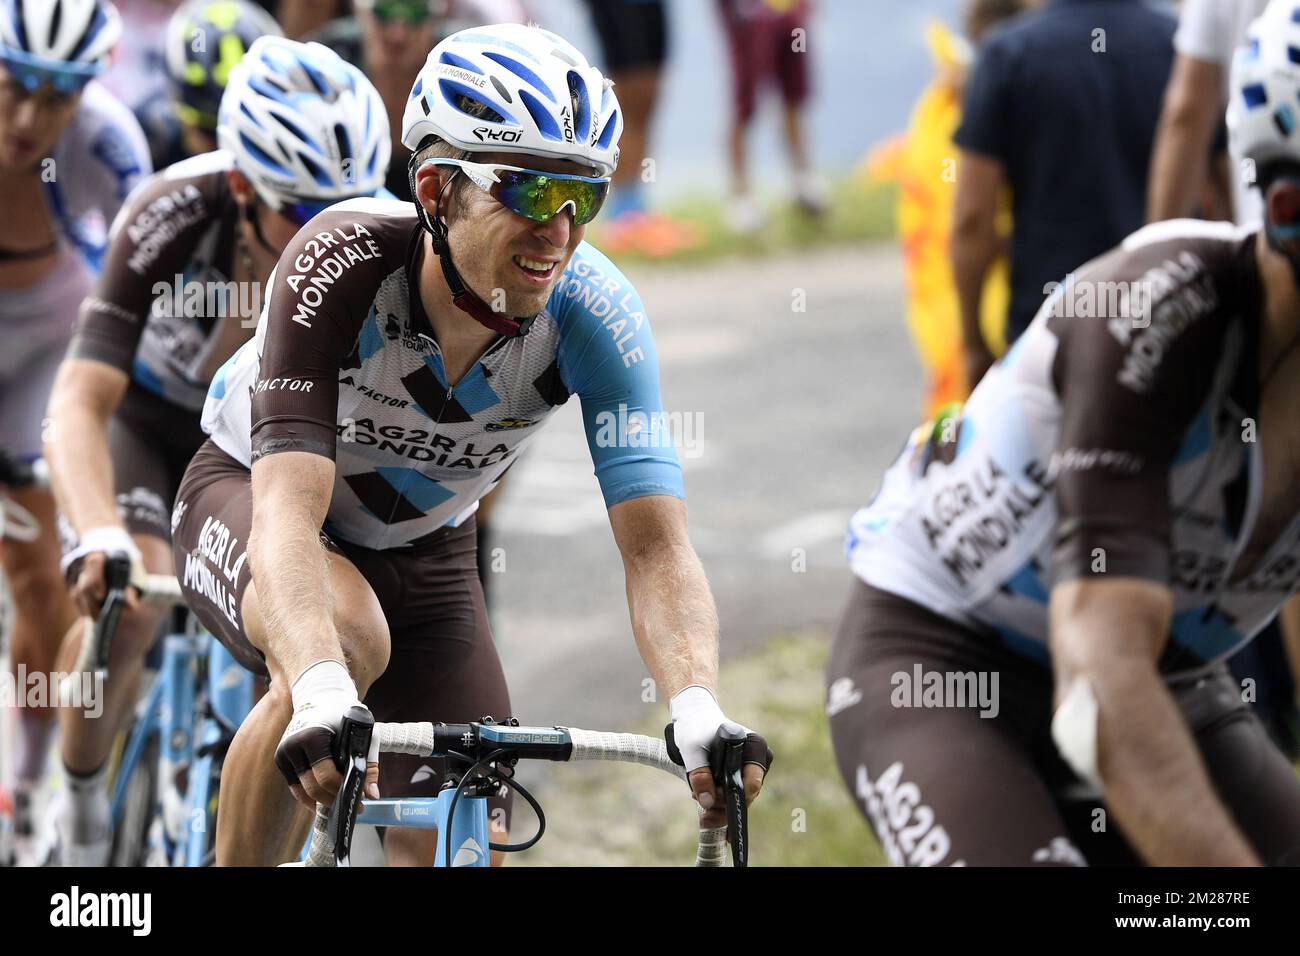 Belgian Jan Bakelants of AG2R La Mondiale pictured in action during the eighth stage of the 104th edition of the Tour de France cycling race, 187,5km from Dole to Station des Rousses, France, Saturday 08 July 2017. This year's Tour de France takes place from July first to July 23rd. BELGA PHOTO YORICK JANSENS Stock Photo